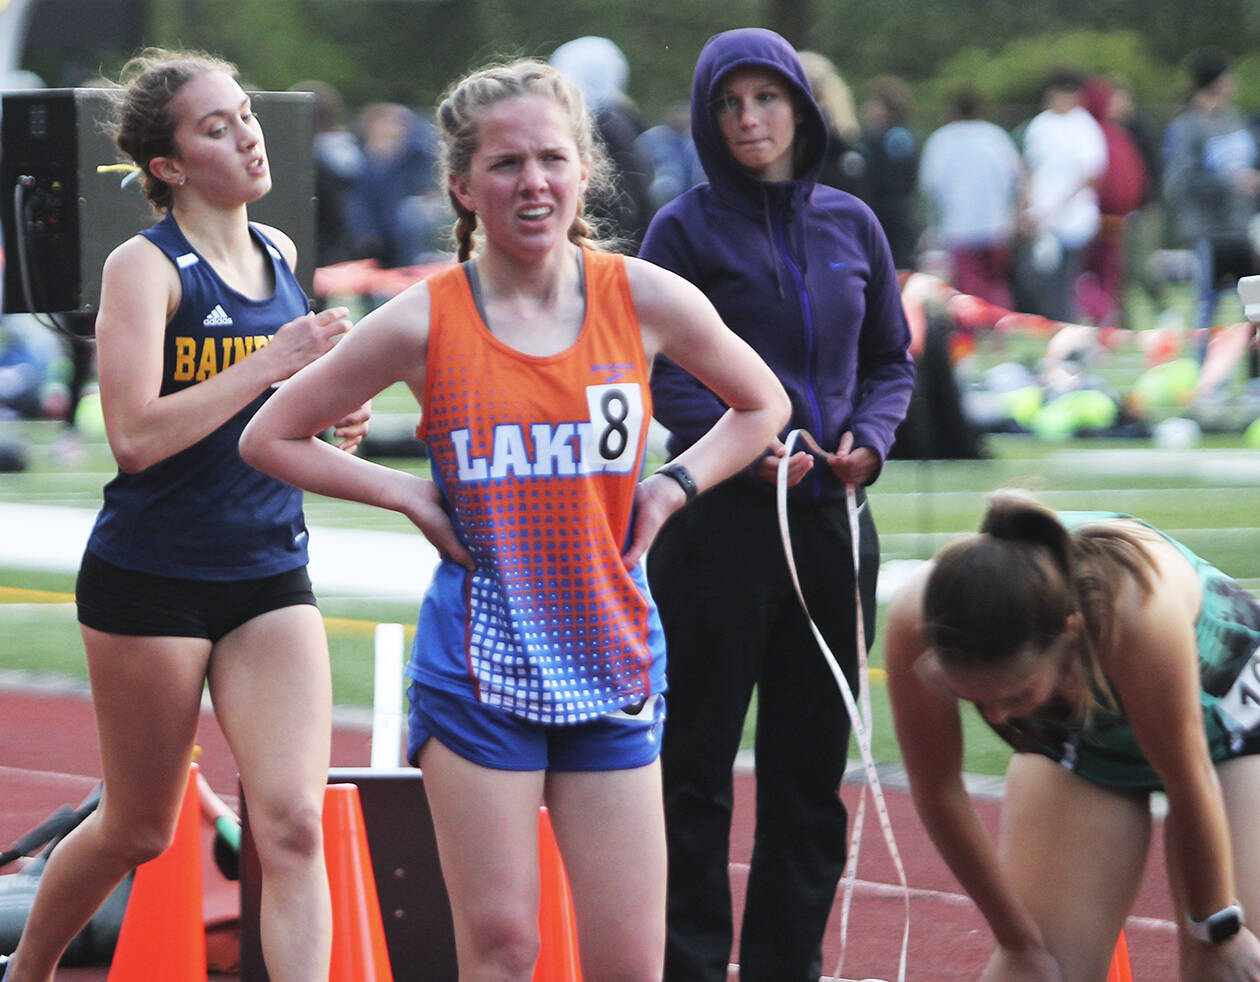 Eden Michael of Bainbridge crosses the finish line in the 1600 as others catch their breath.